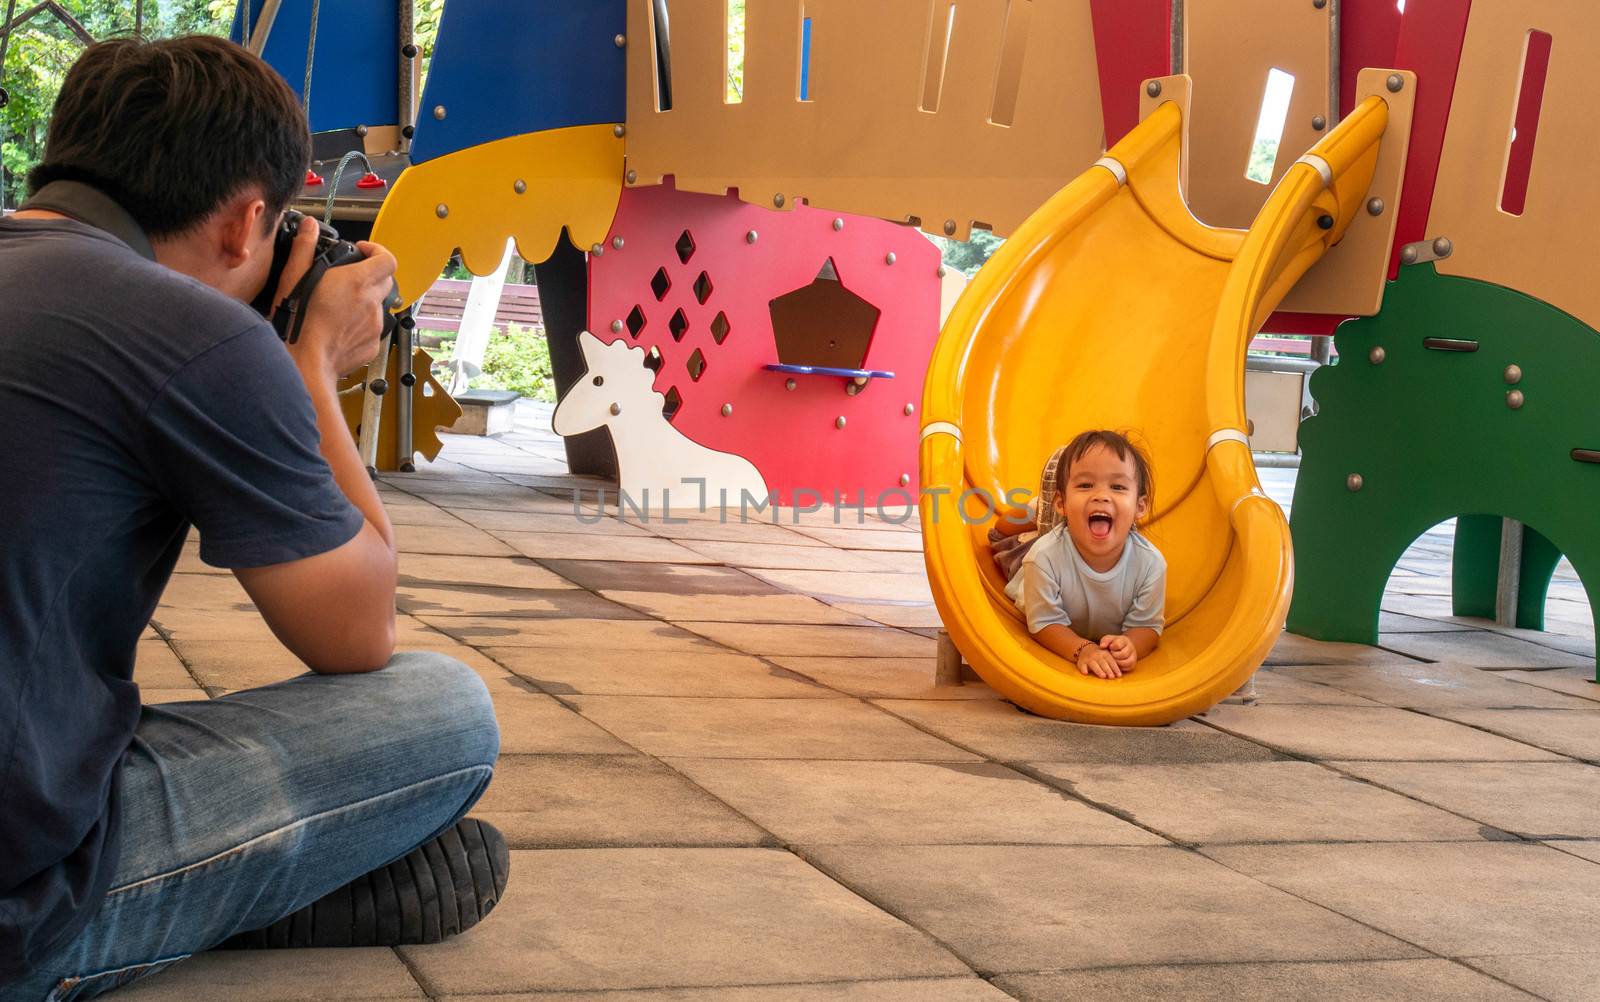 Father take a photo his daughter while having fun on slide at playground.